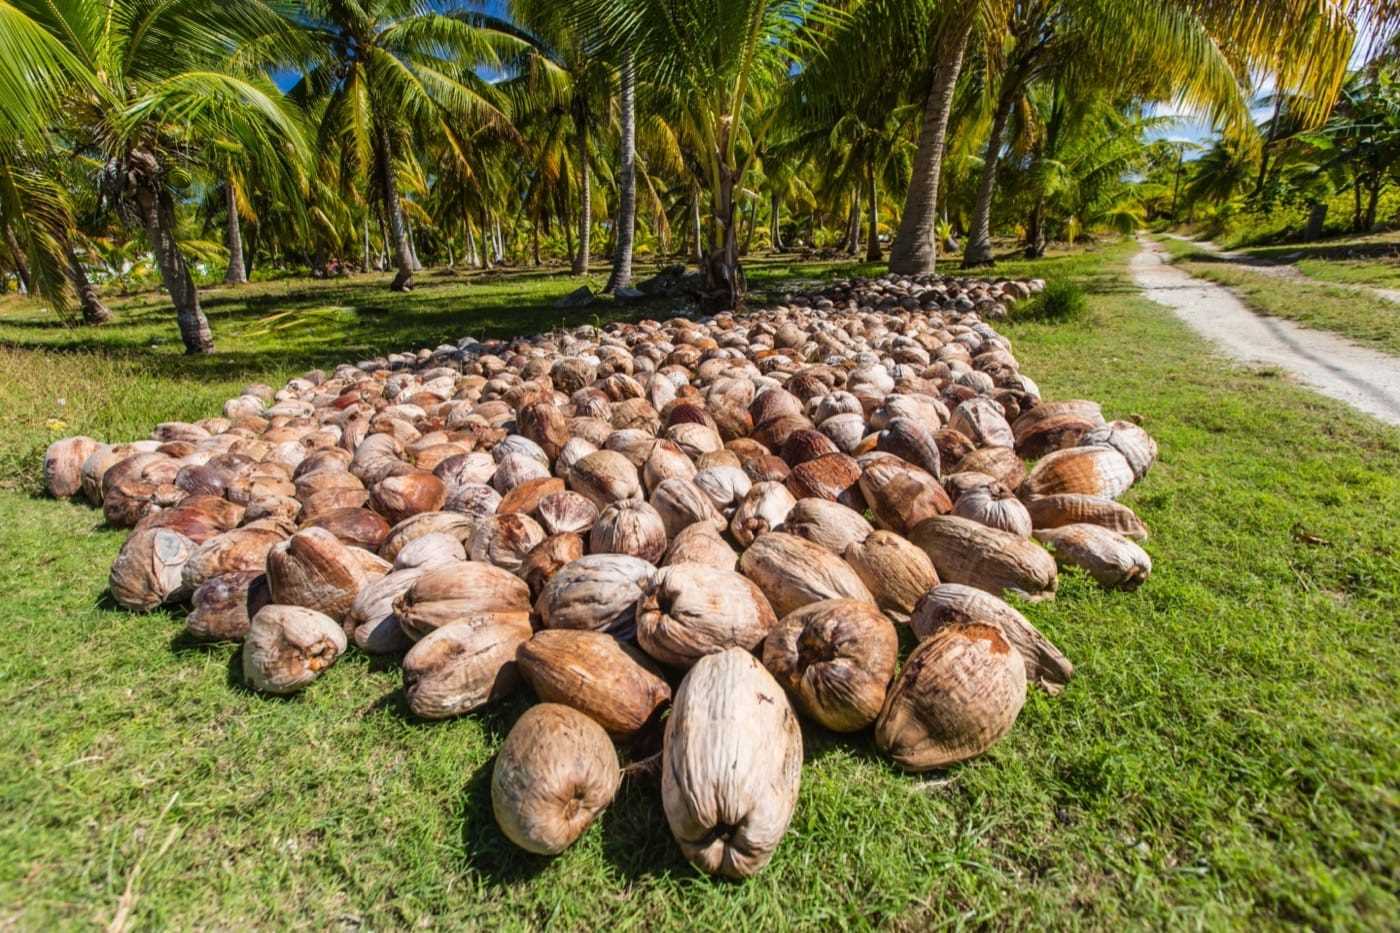 A large amount of coconuts laid out on a grassy field, palm trees in the background